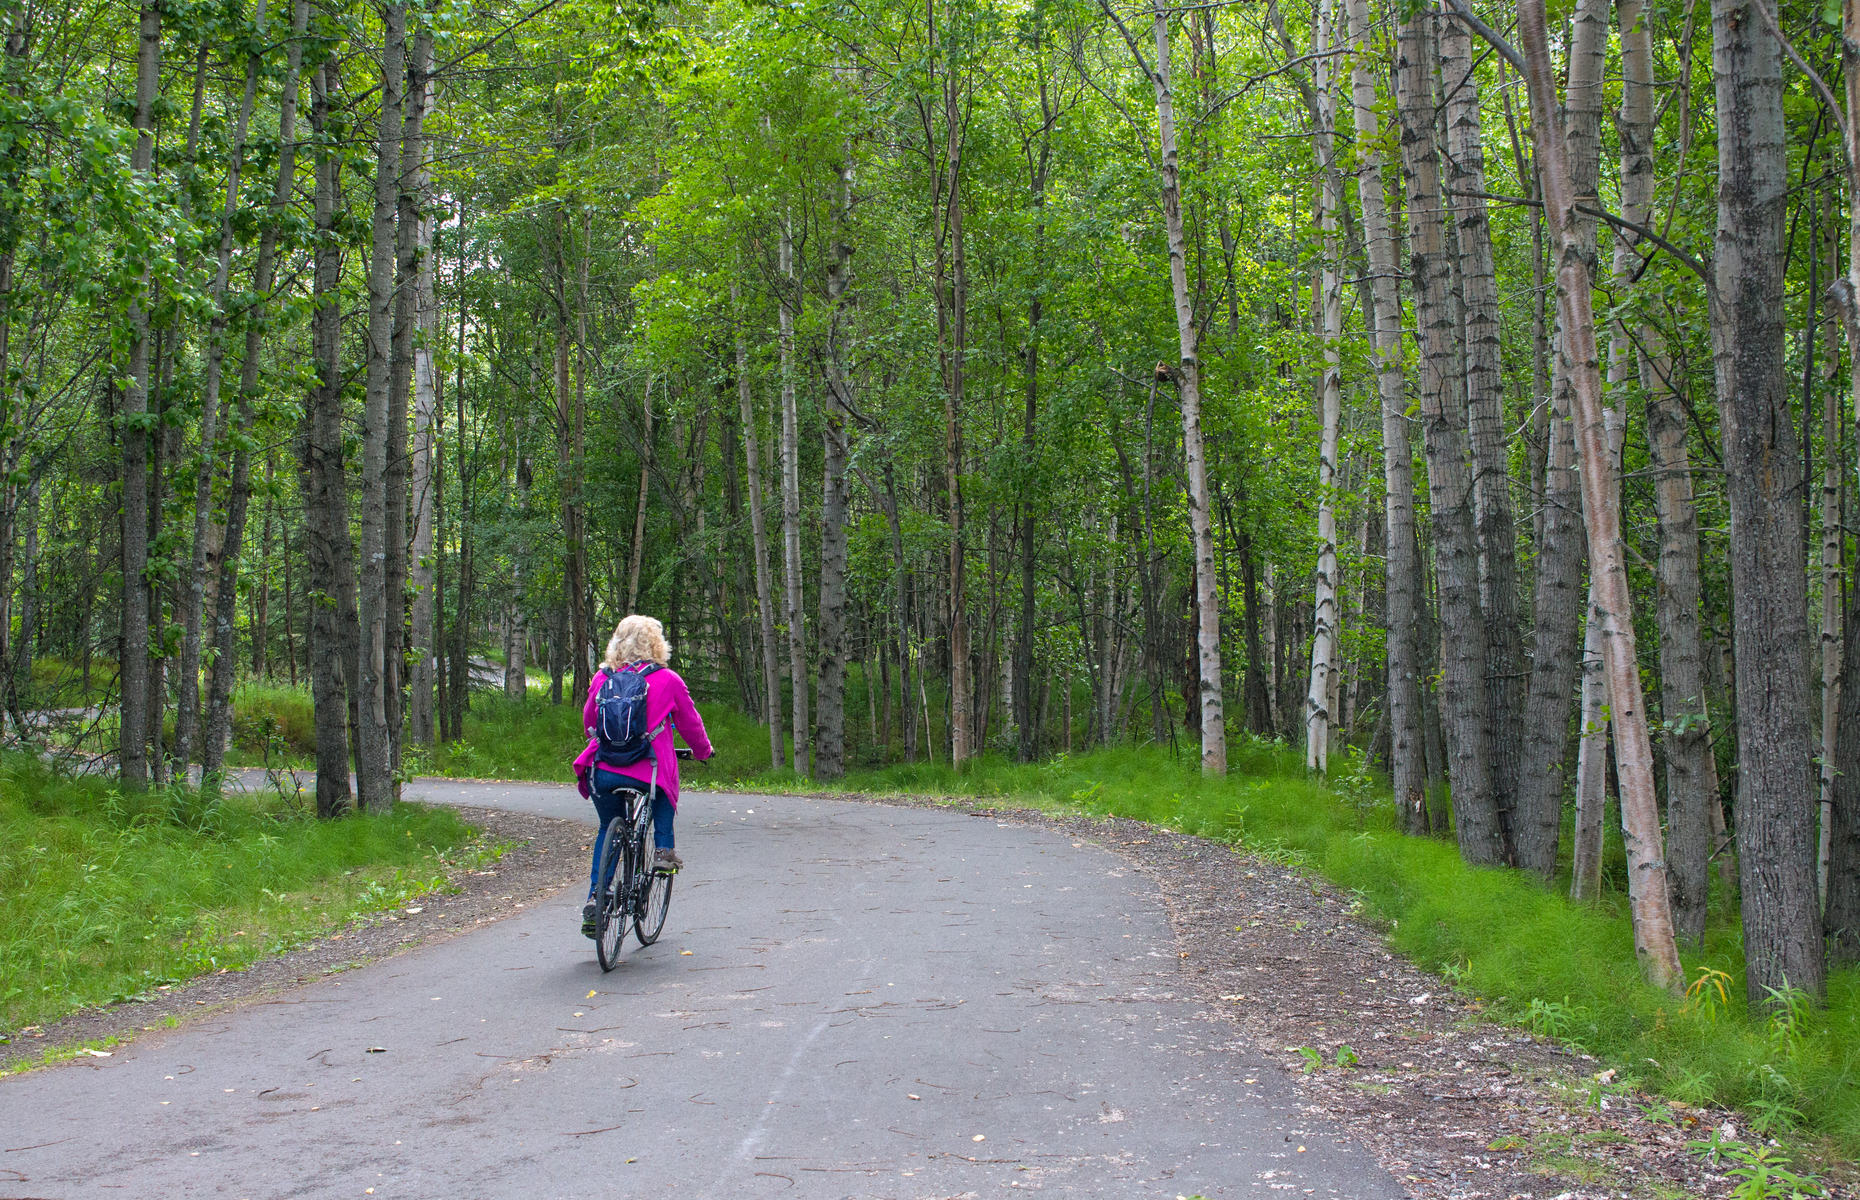 Tony Knowles Coastal Trail (Image: Lisa A. Ernst/Shutterstock)